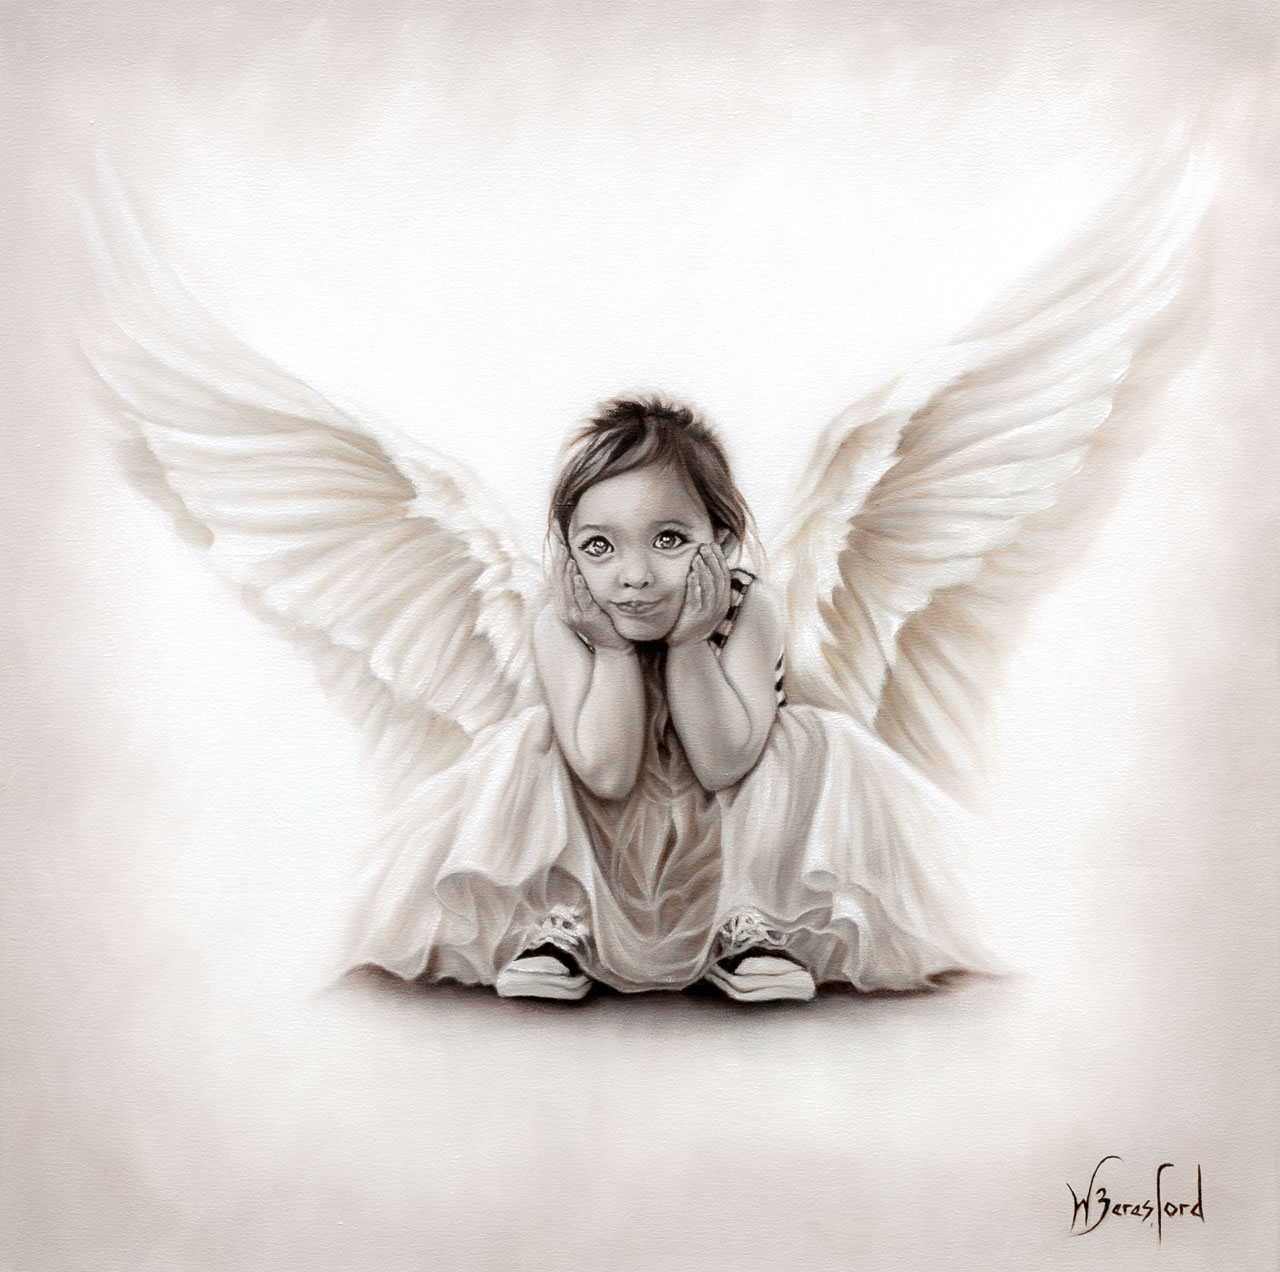 "Soul Child", oil painting in monochrome of a little girl angel by Wendy Beresford